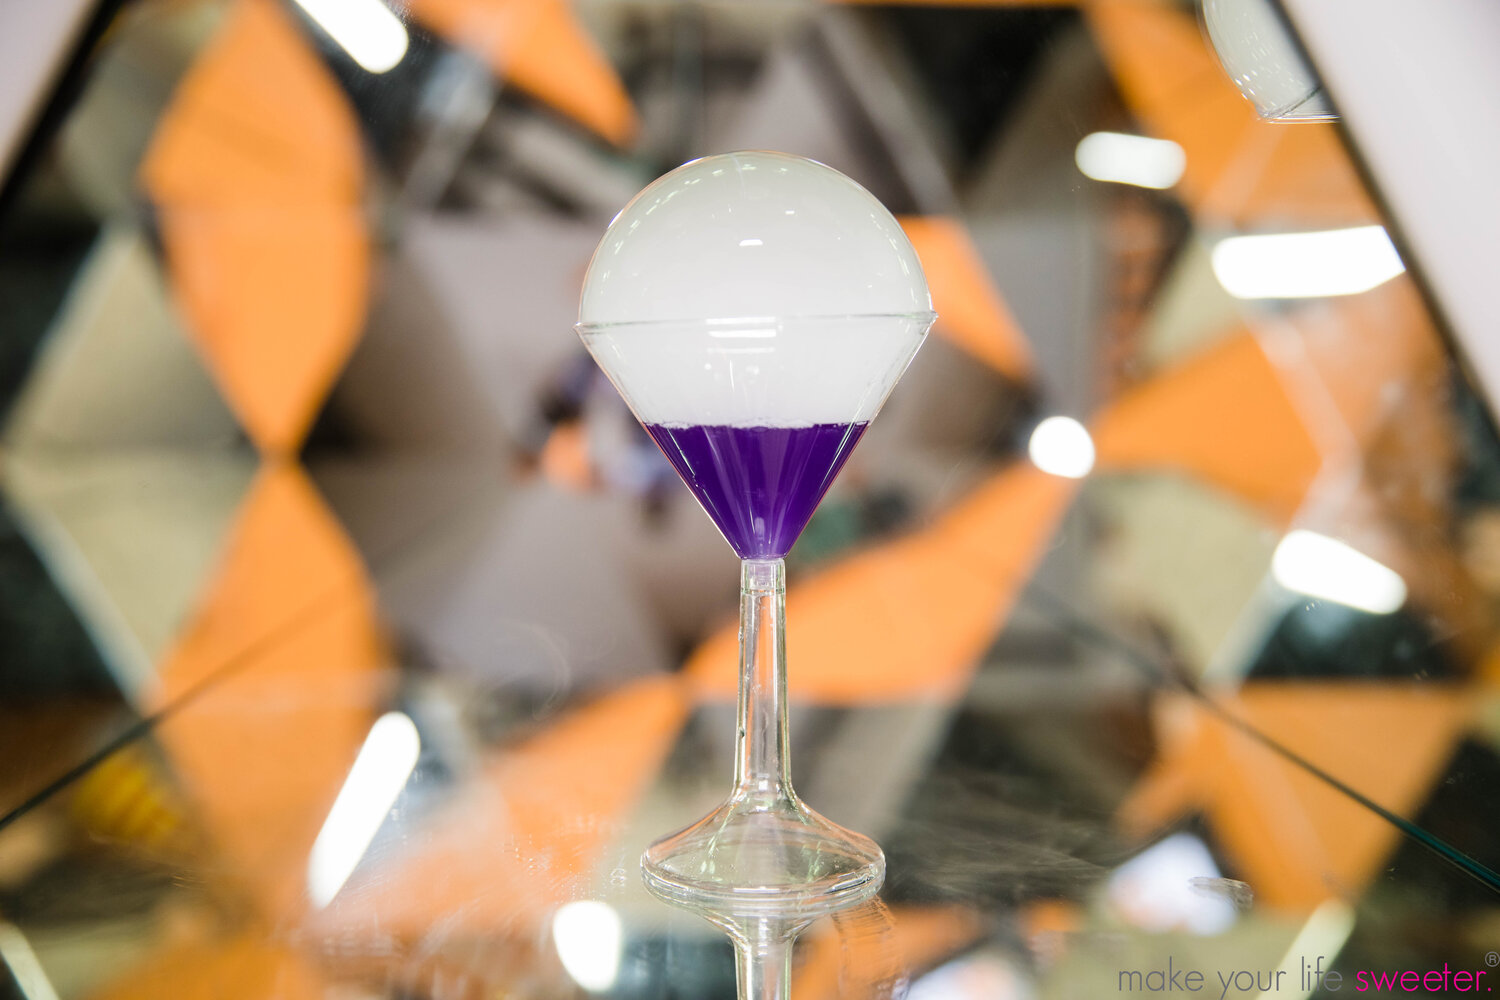 The flavored edible vapor bubble looks amazing with our signature lychee martini